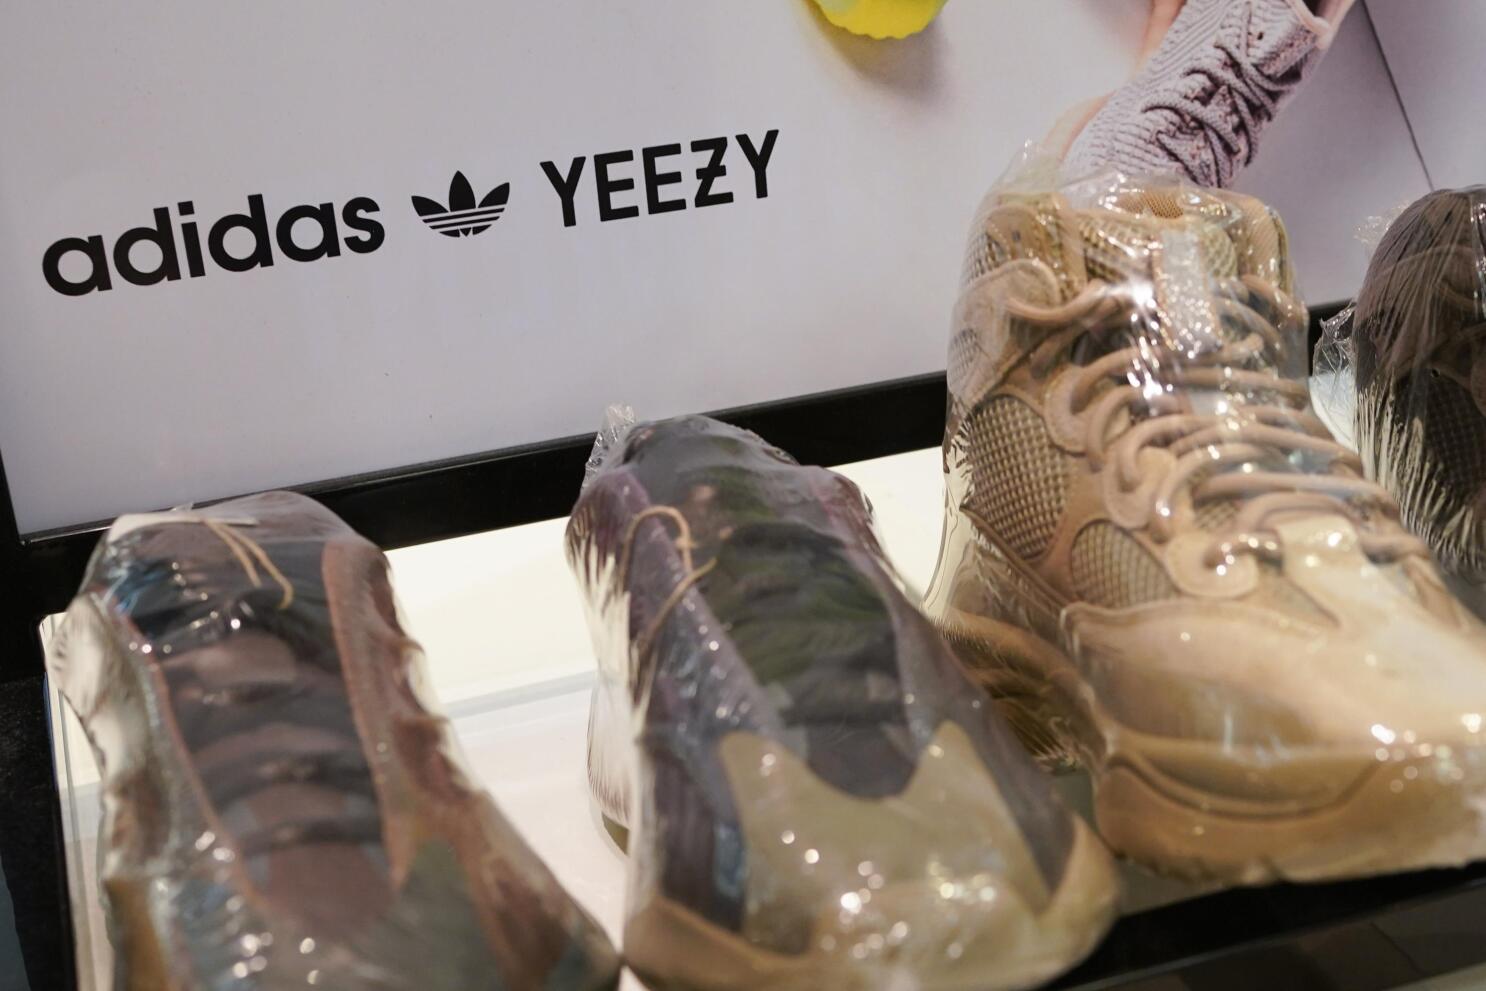 Yeezy shoes are back on sale — months after Adidas cut ties with